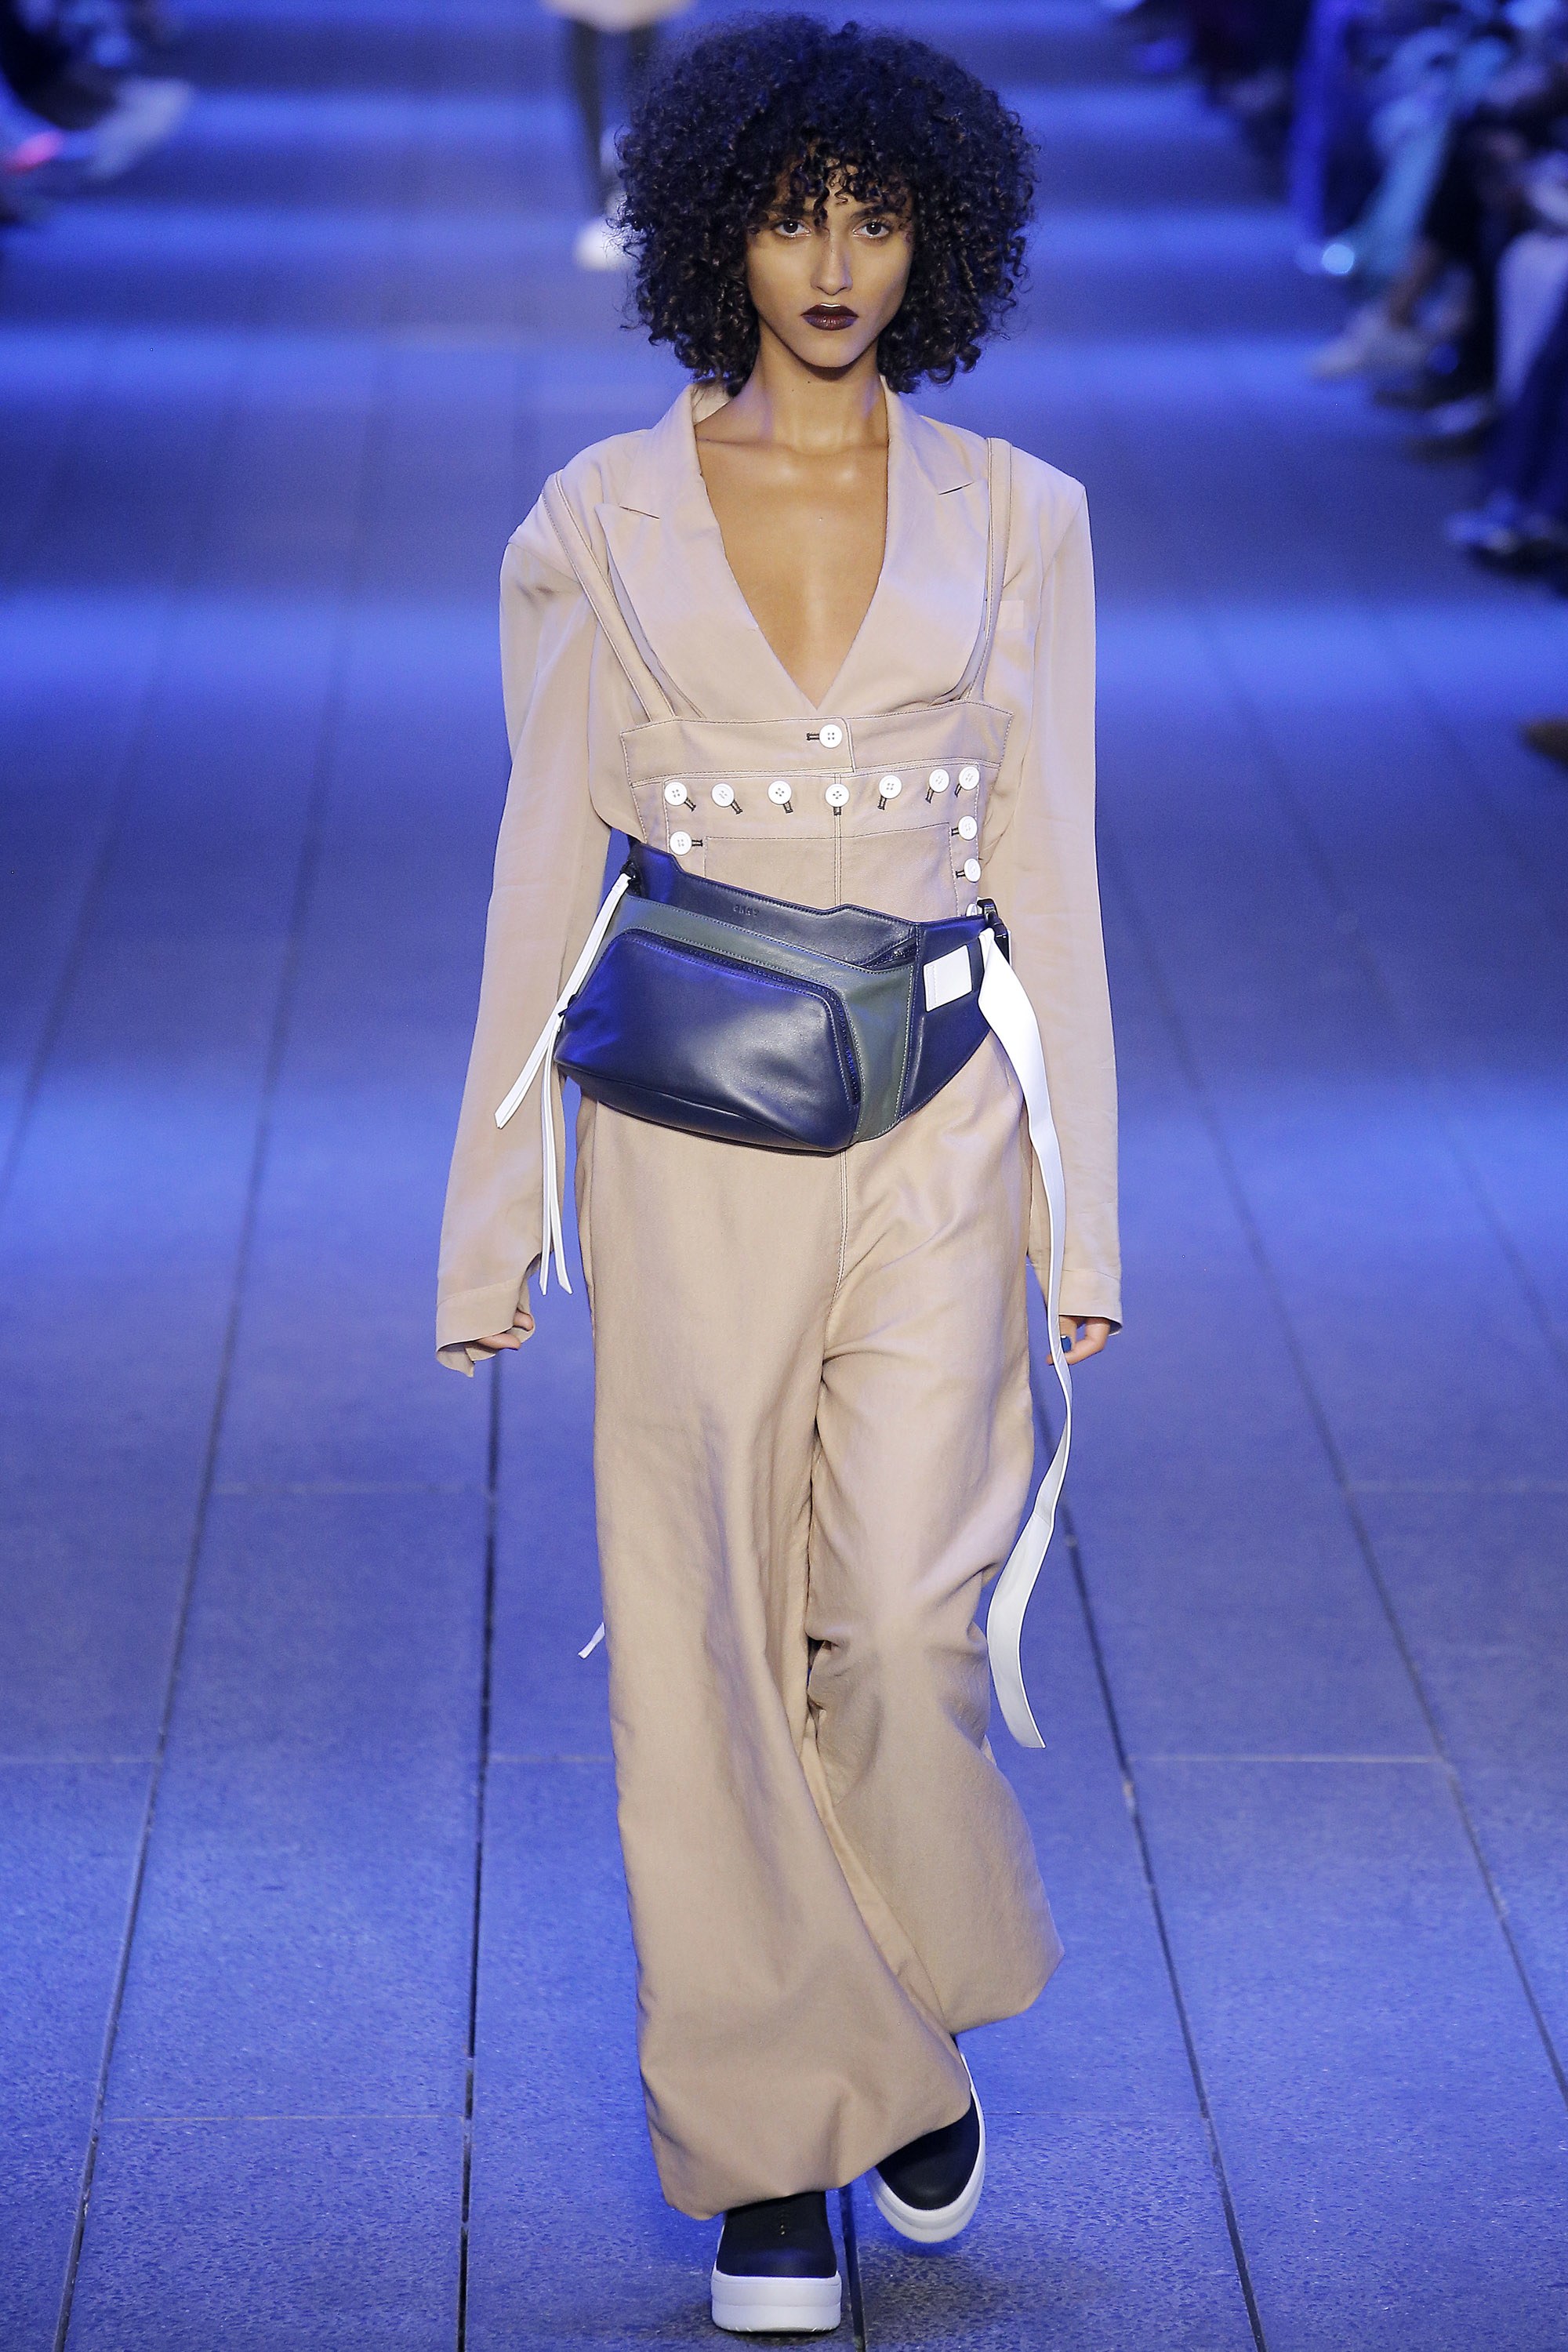 Fanny Packs Trend on The Runway